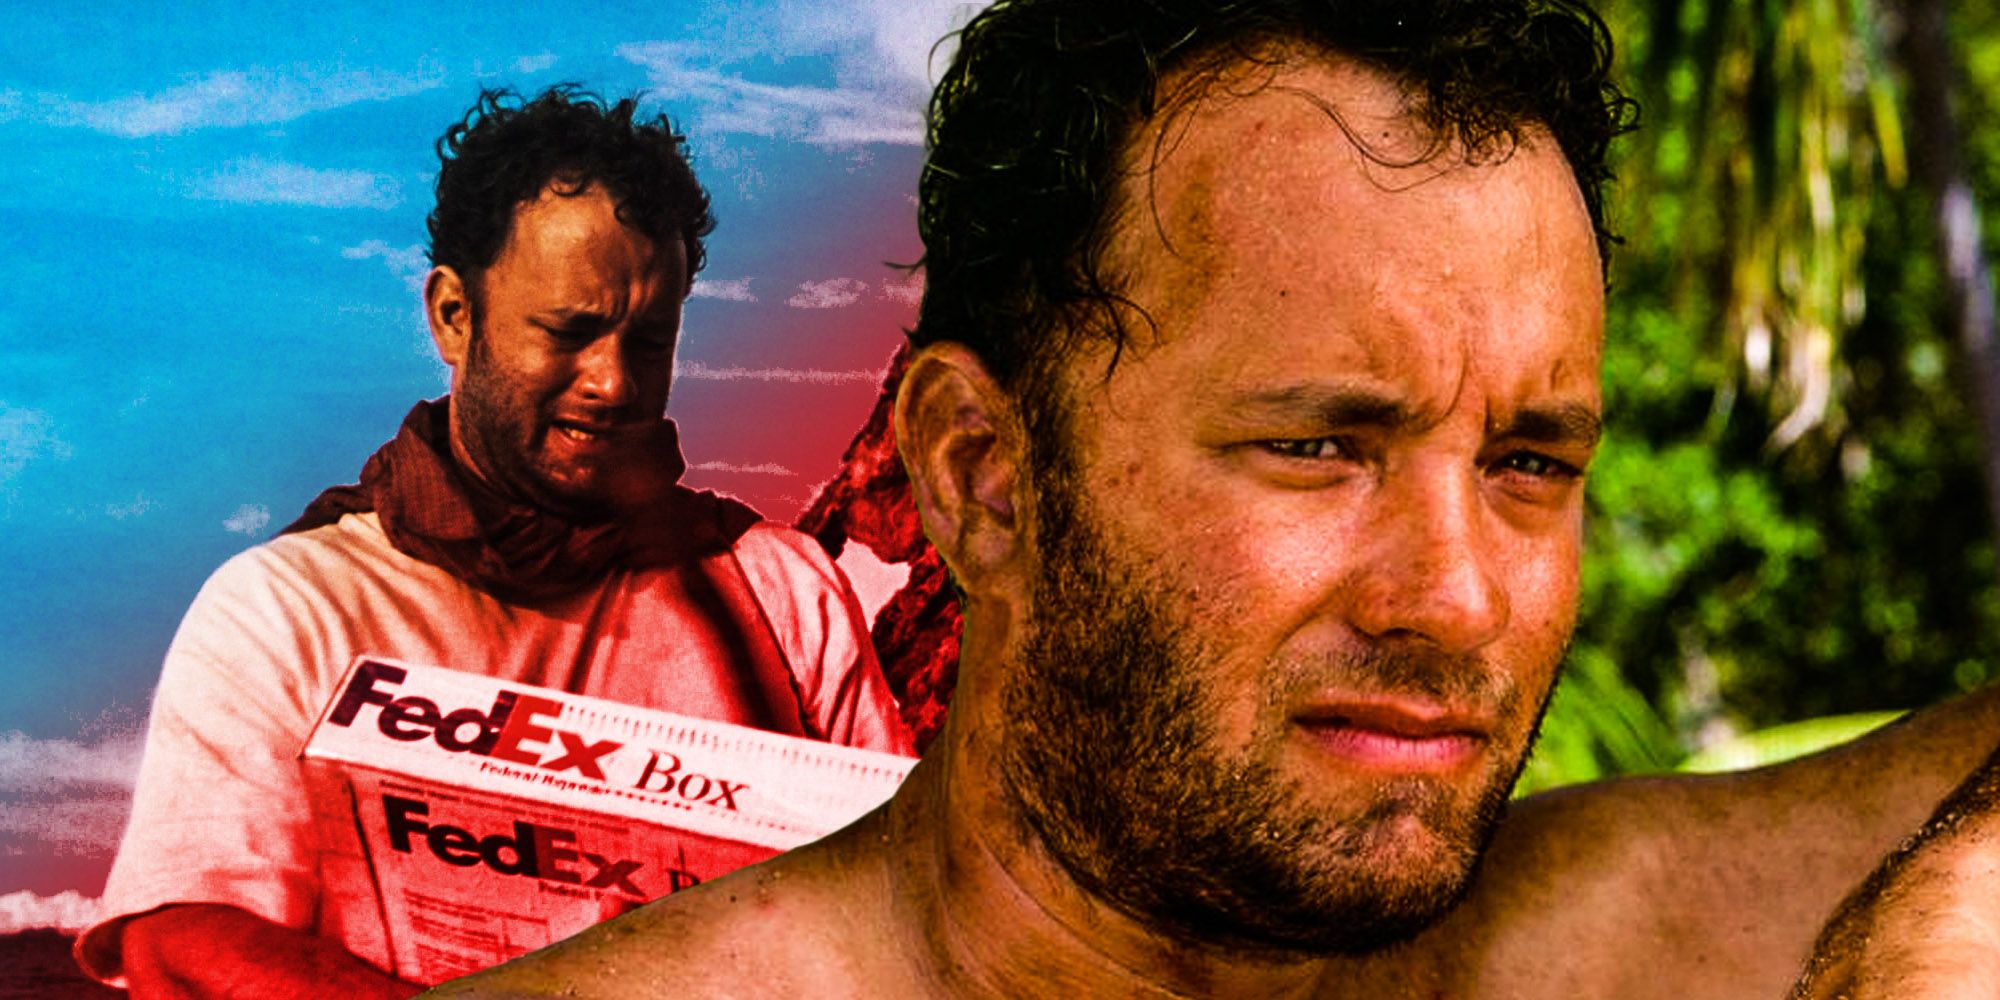 Tom Hanks Cast Away Fex ex product placement